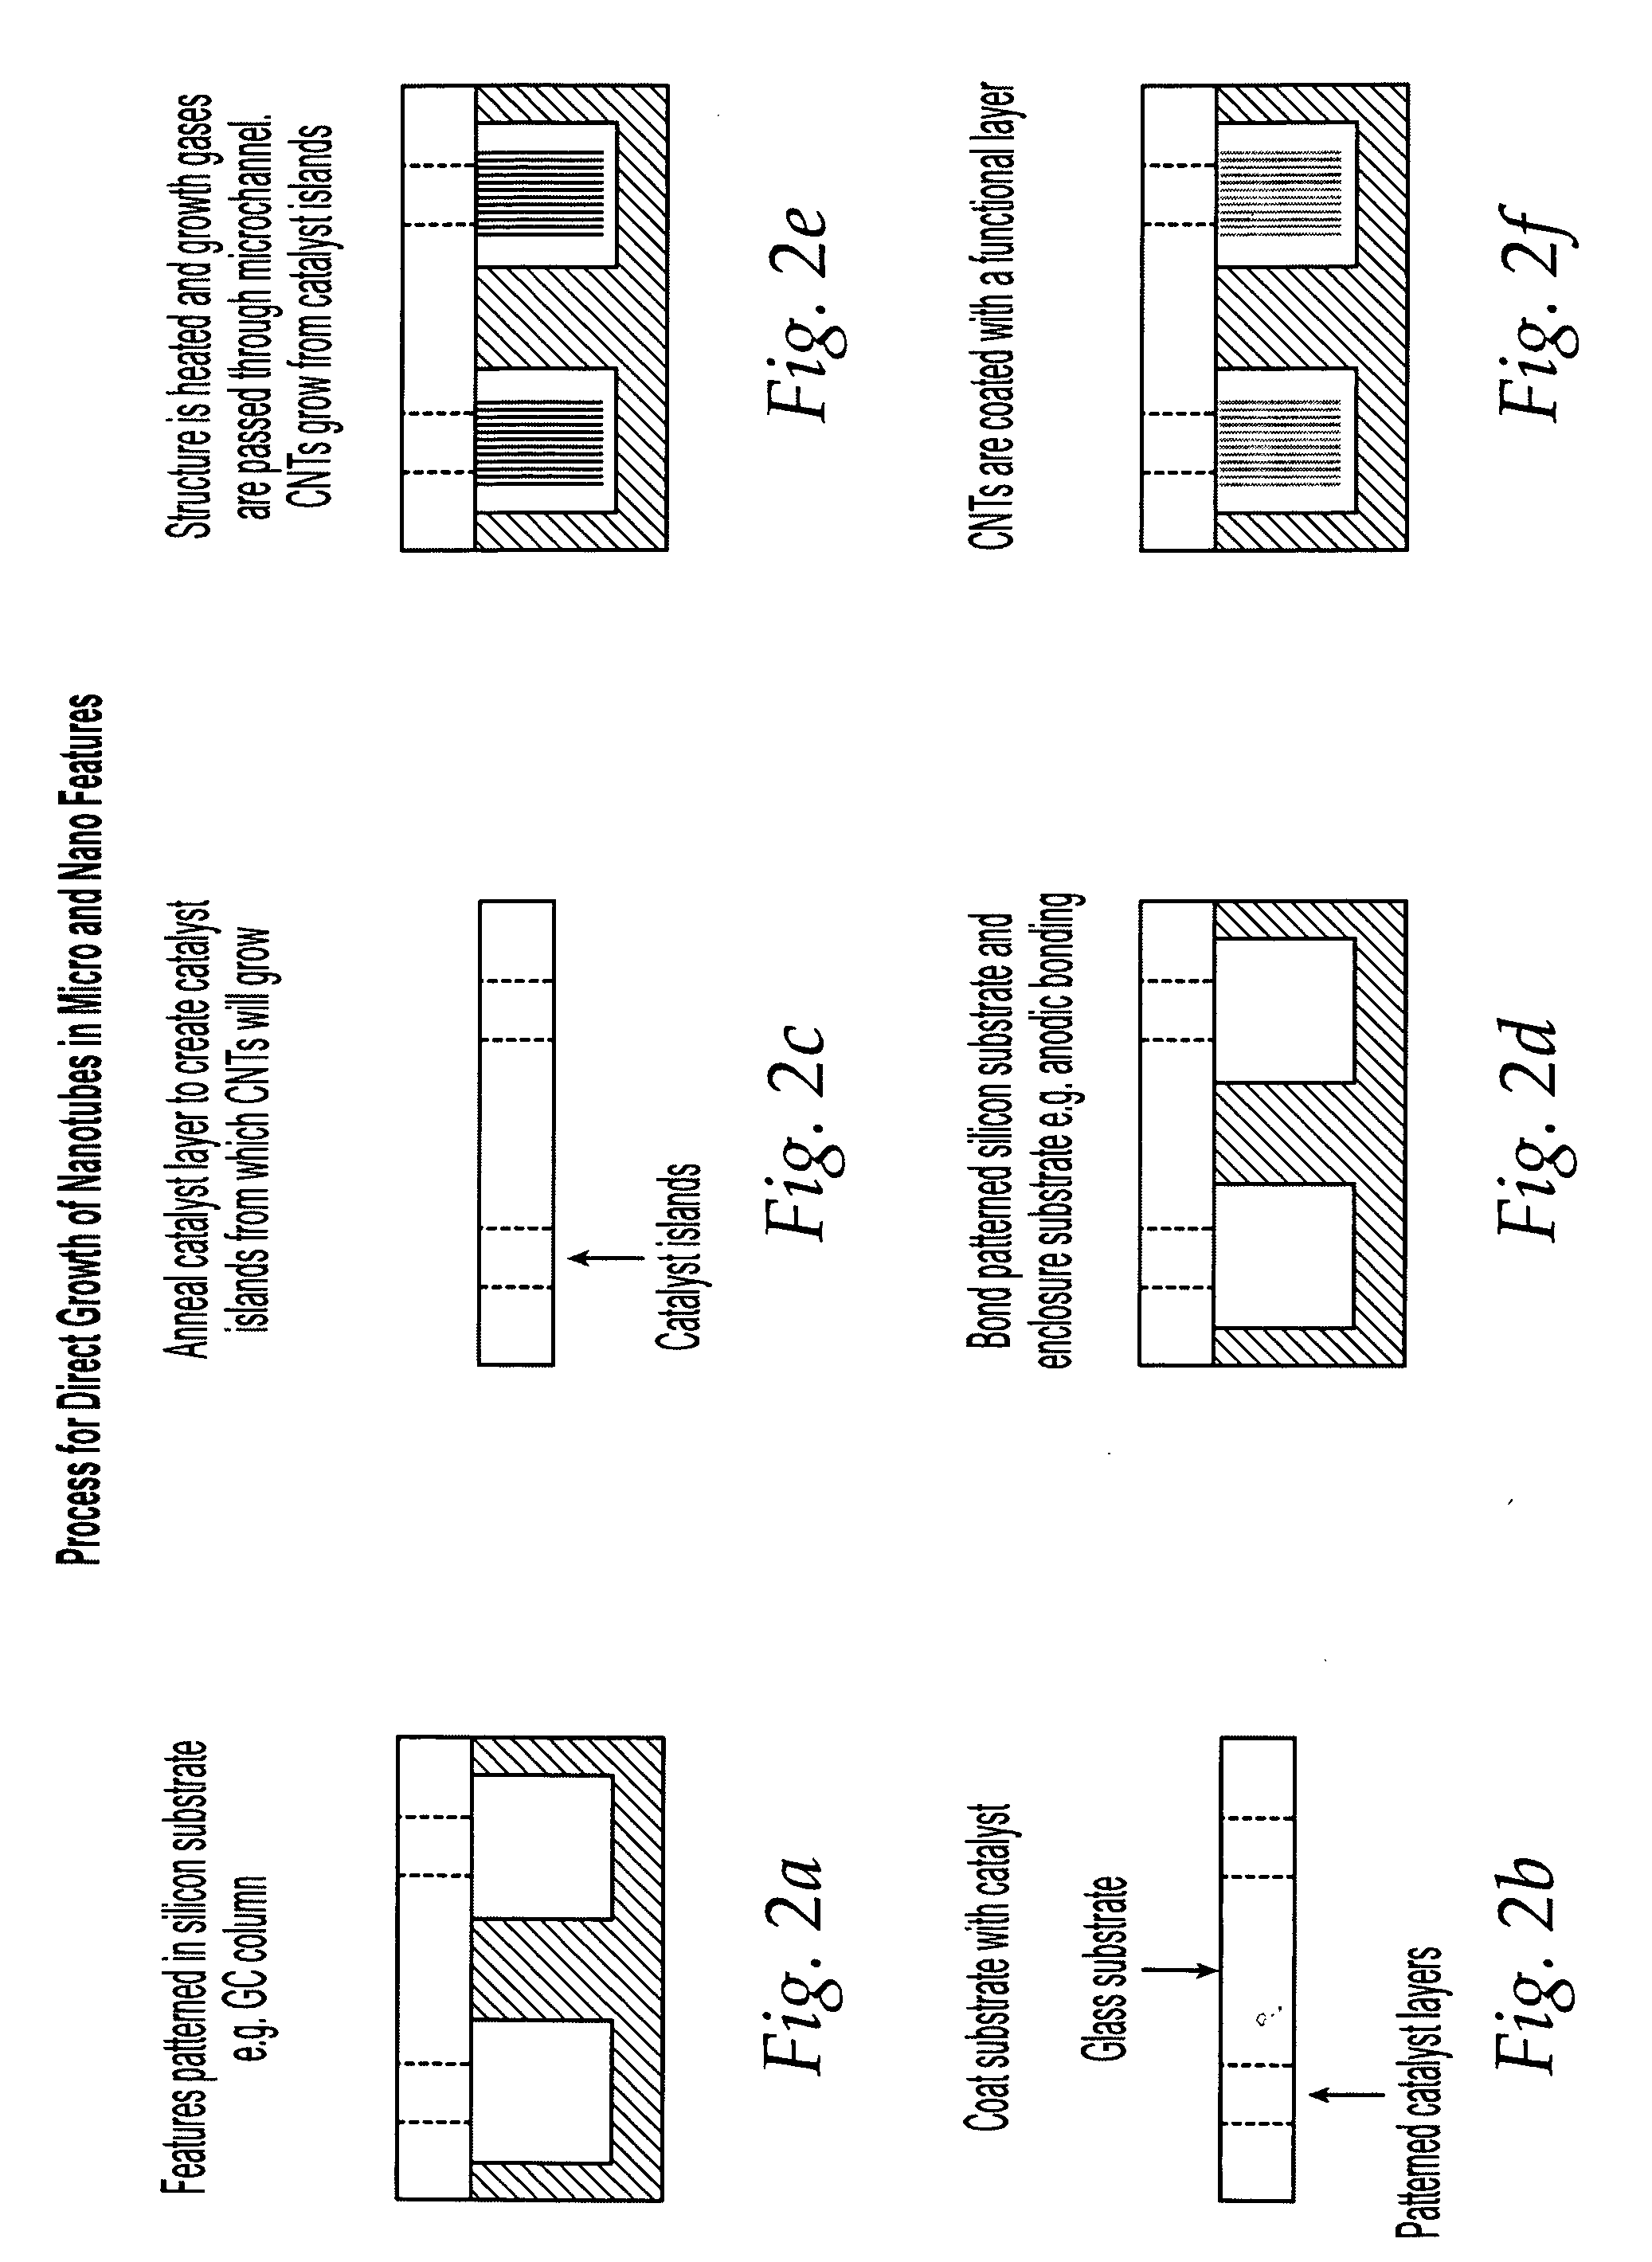 Methods of synthesis of nanotubes and uses thereof